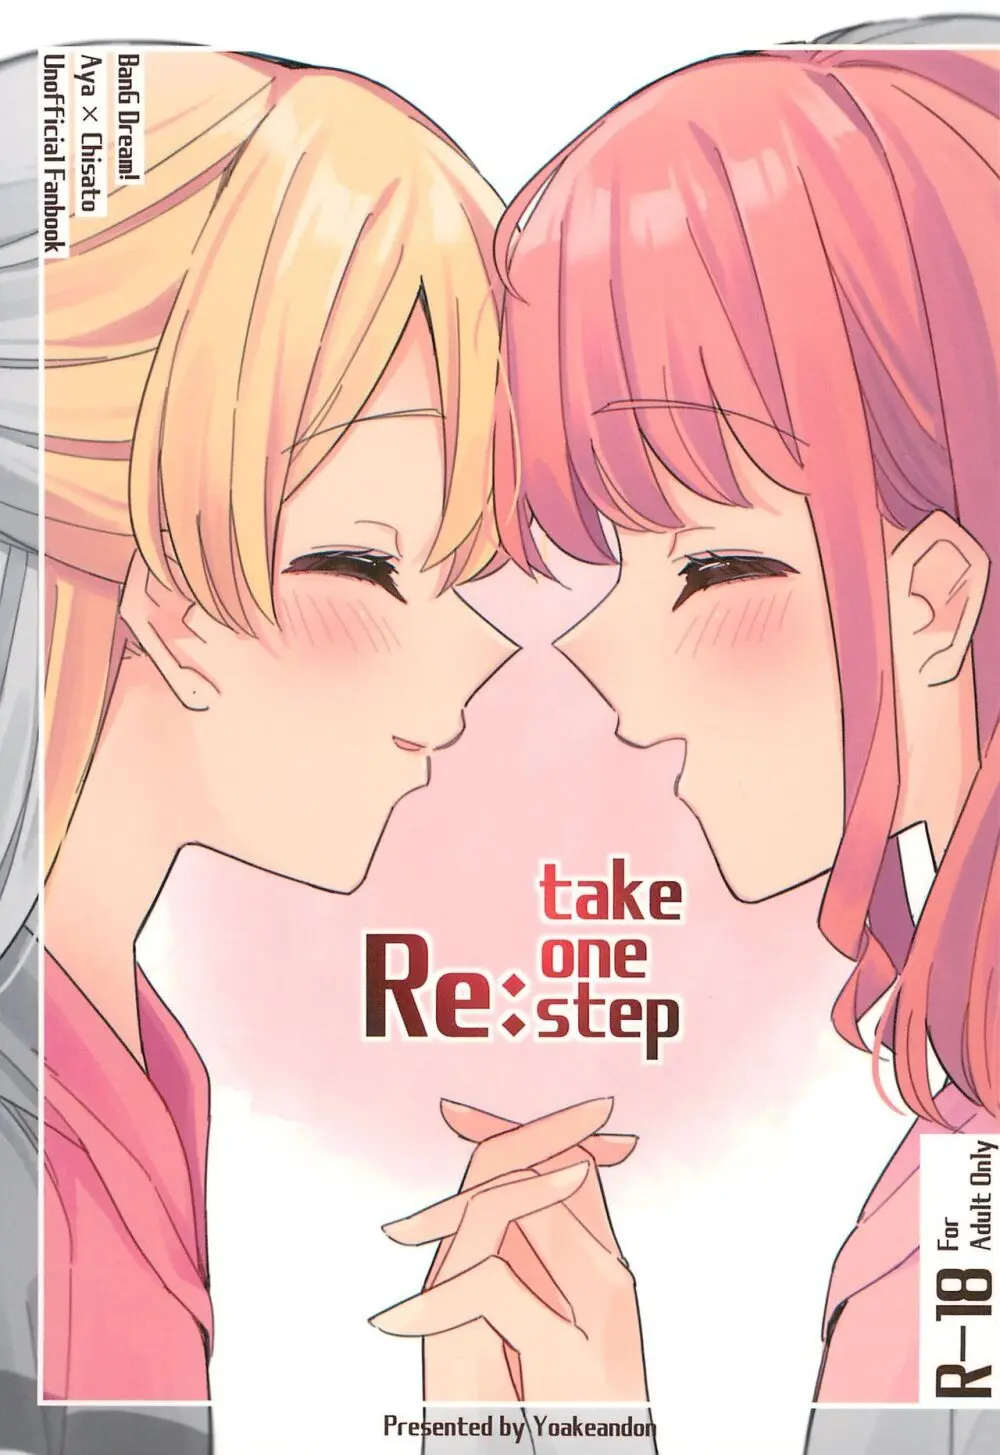 Re:take one step 1ページ